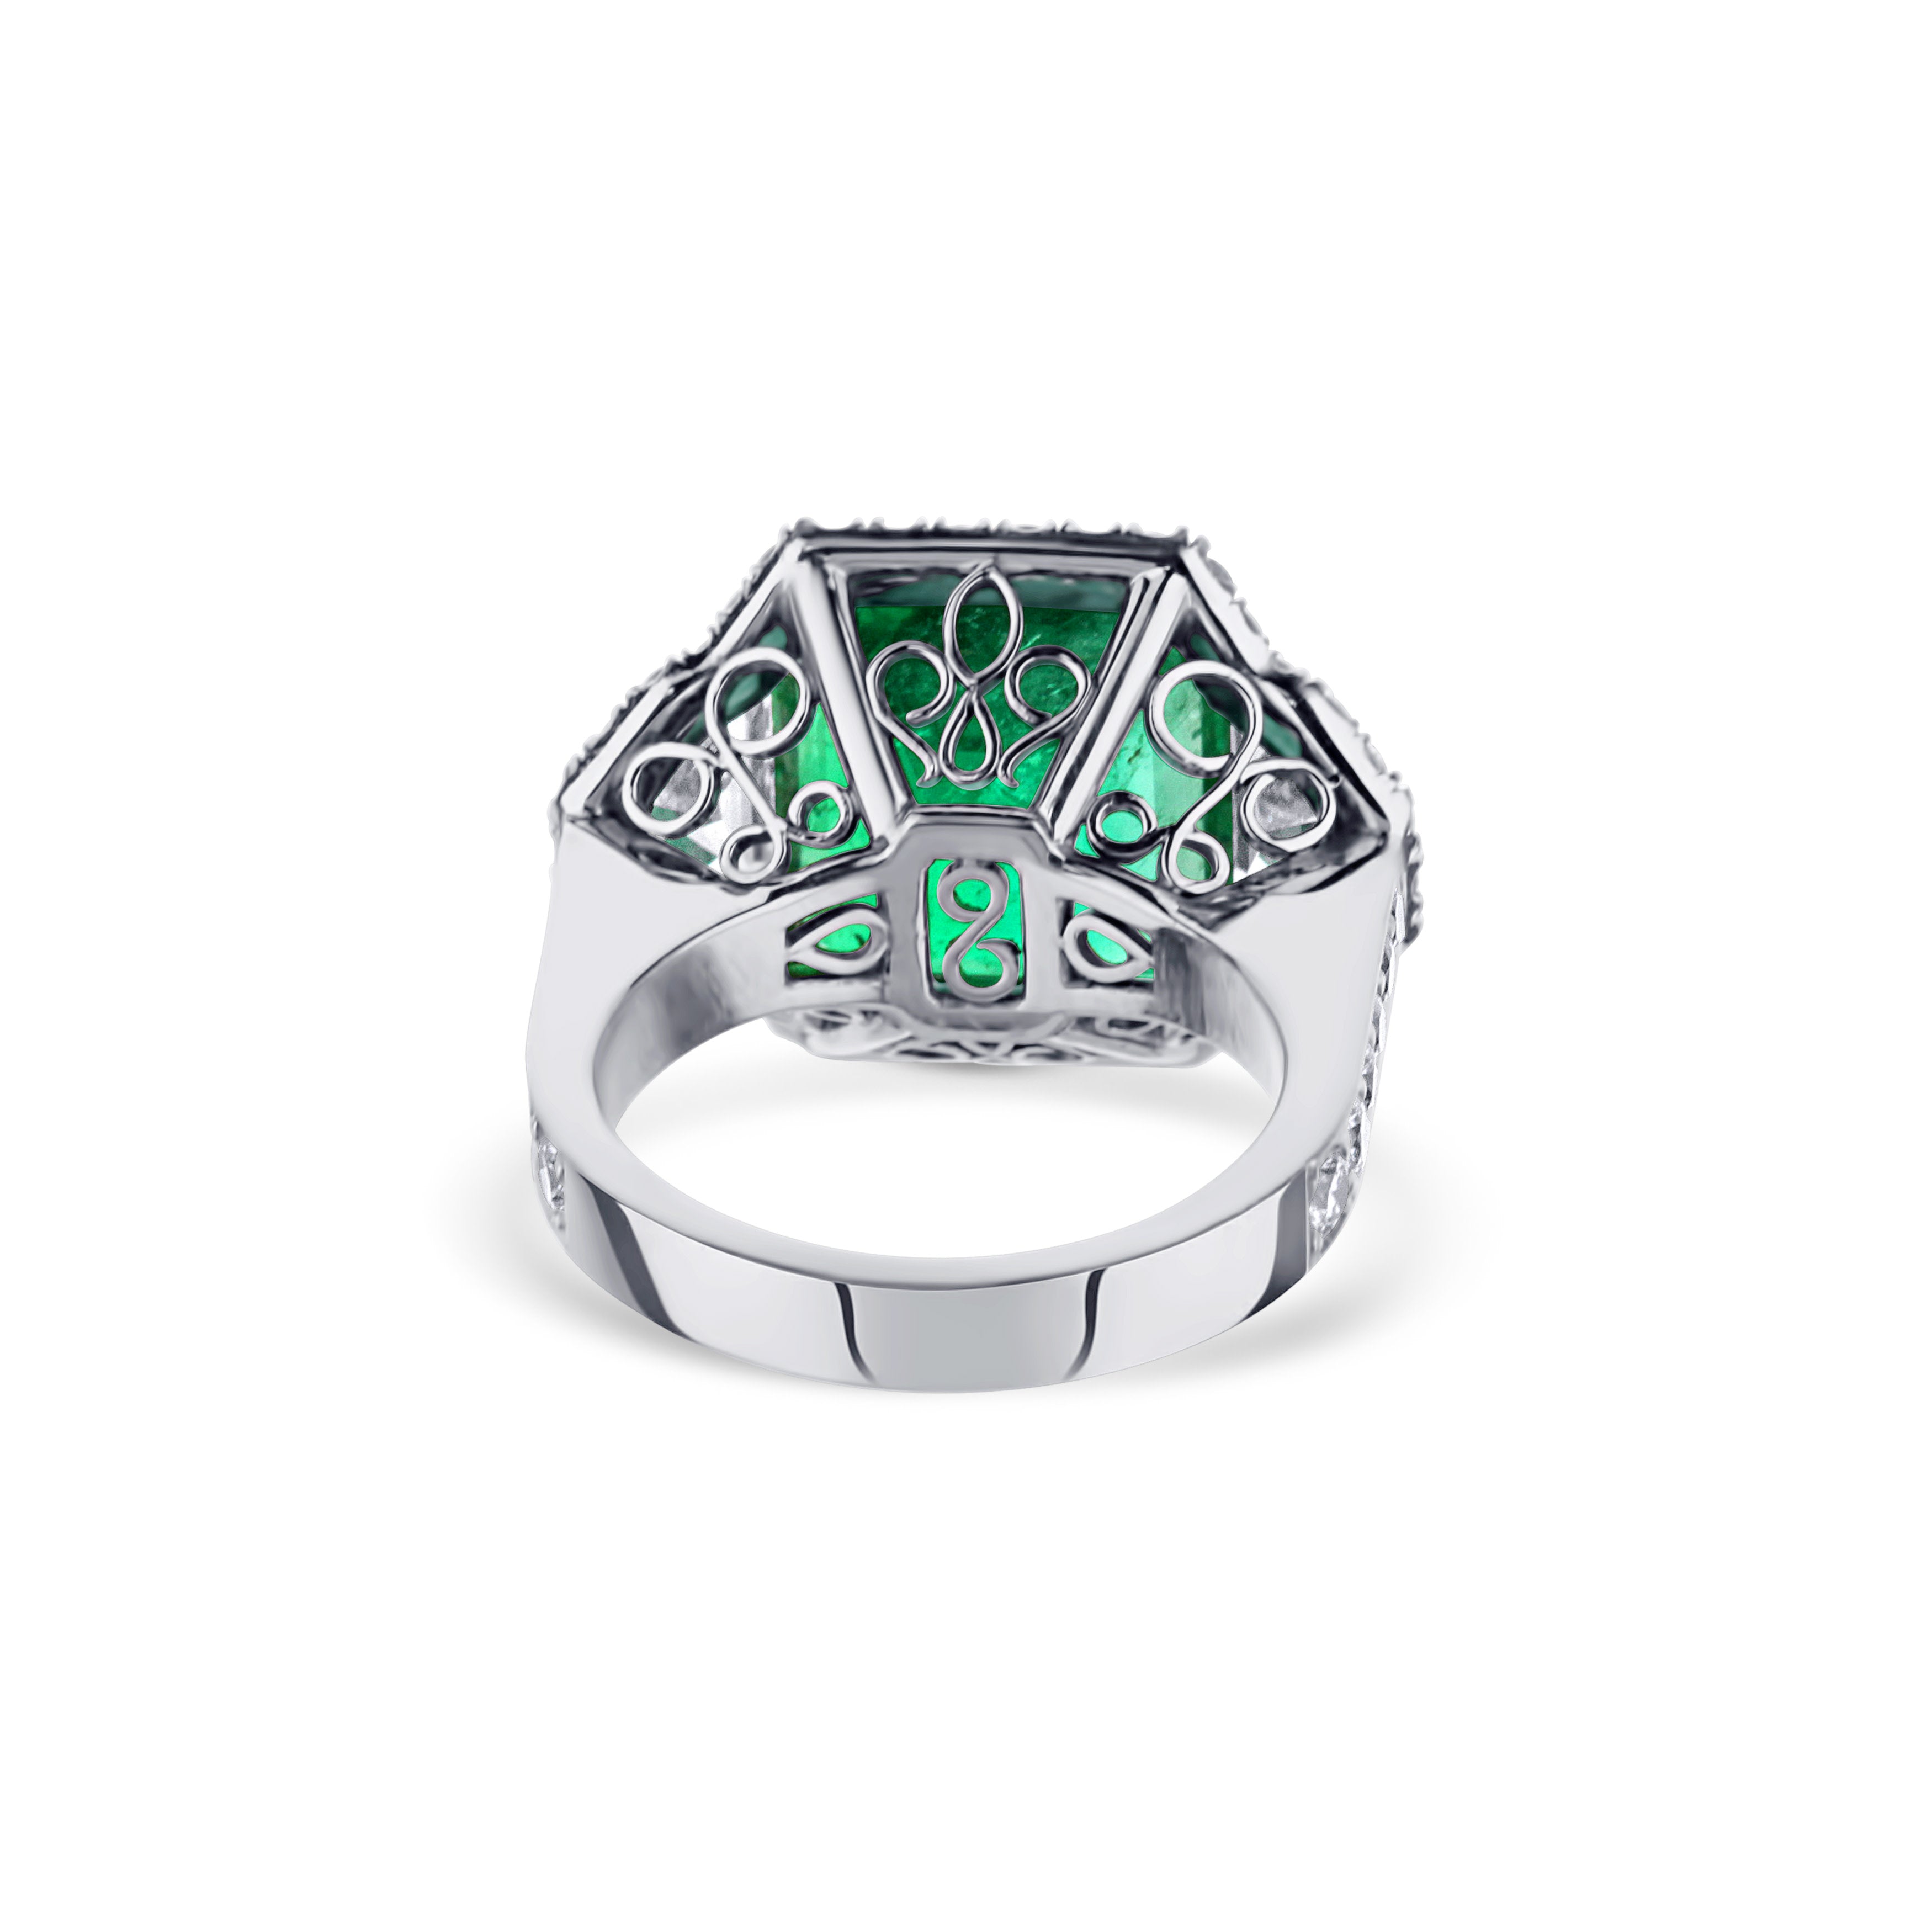 Platinum Emerald-Cut Emerald Engagement Ring With Hexagon-Cut Diamond Accents And Diamond Halo